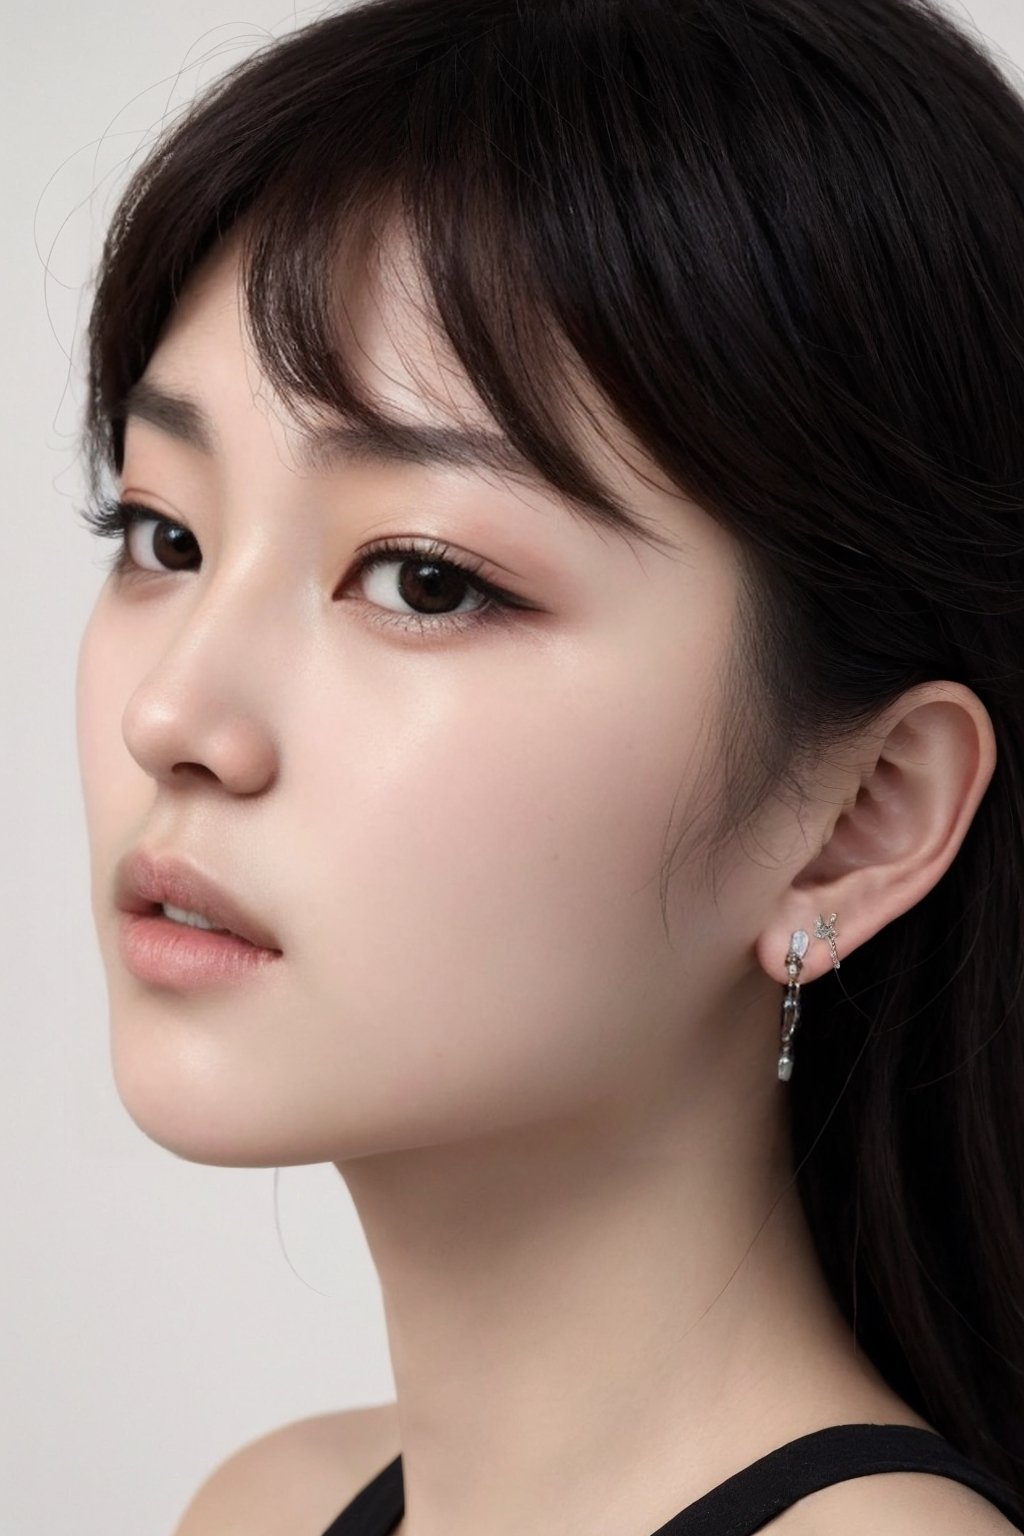 score_.9, score_8_up, score_7_up, young Korean girl, very long, very shiny black hair that reflects light, oval face, frosty lips, small earrings,intricate high quality details,city background  photorealistic,bzsohee